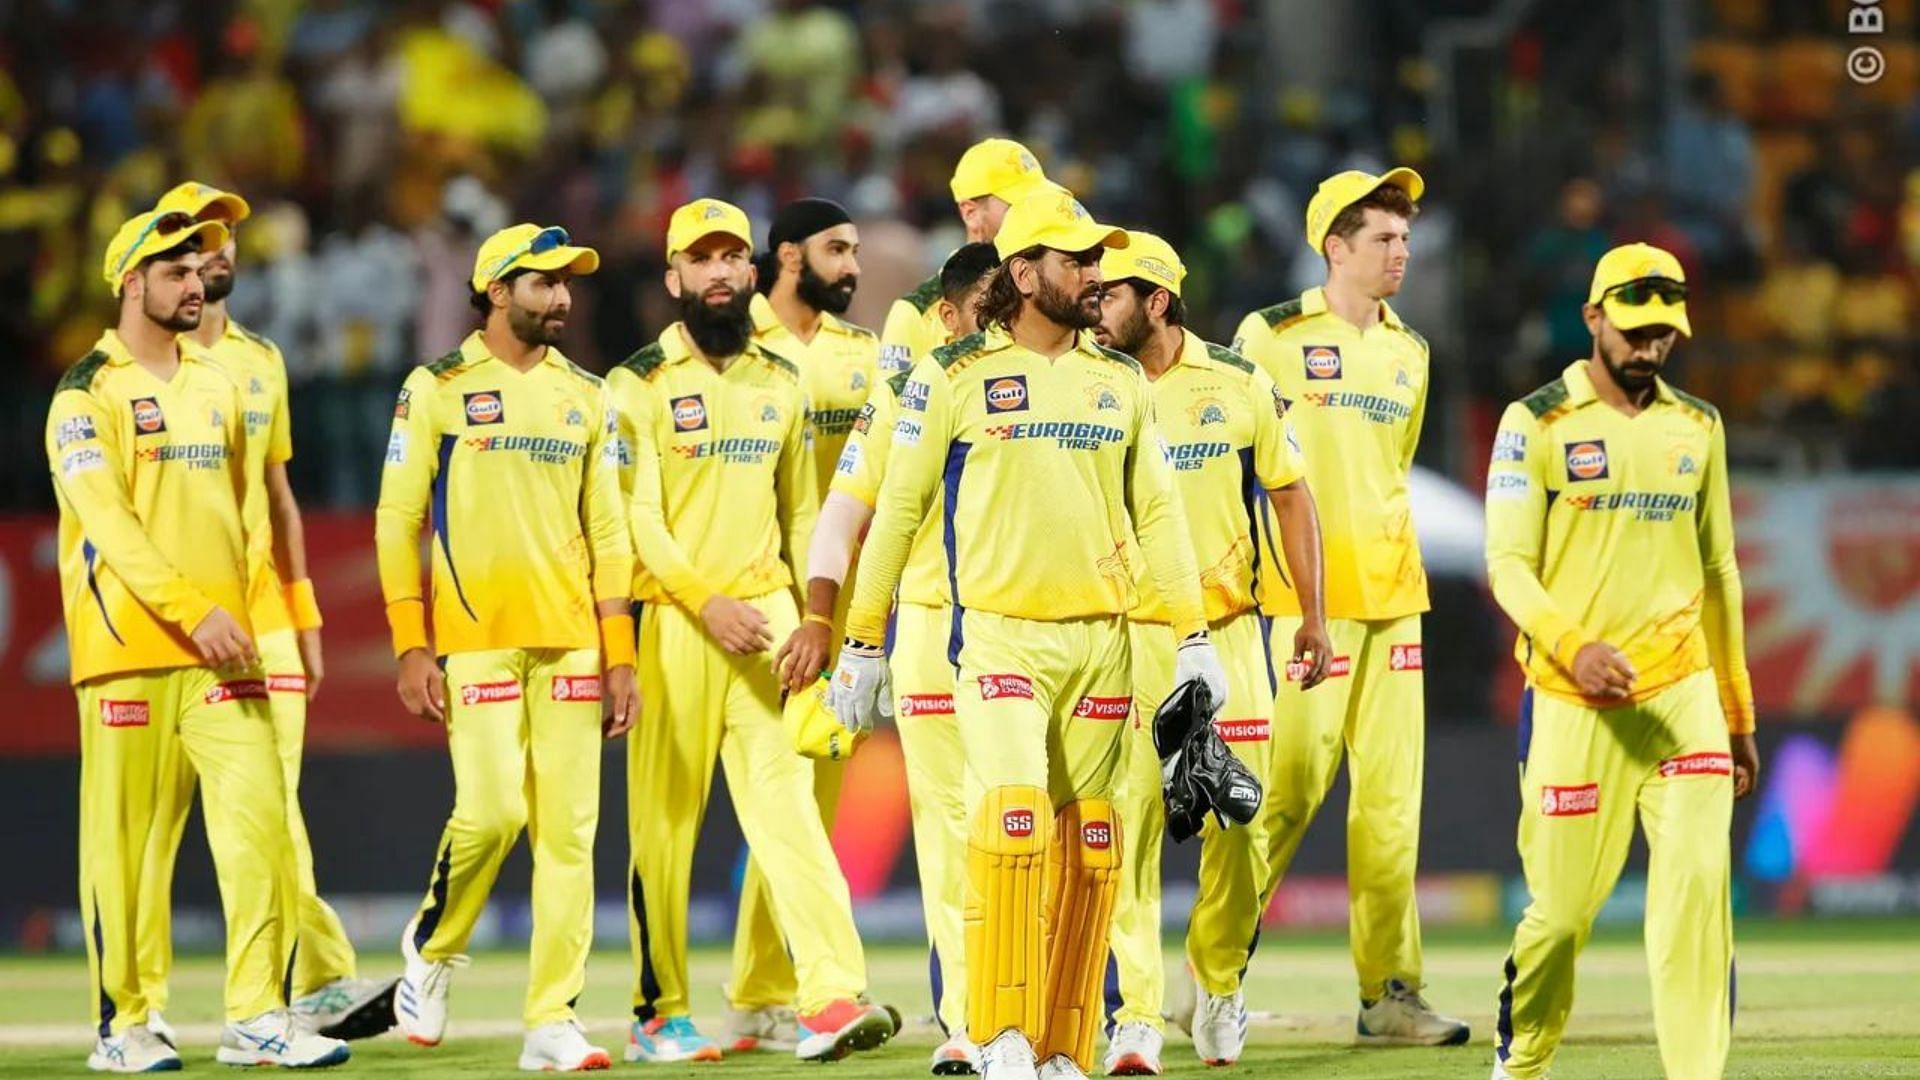 CSK have been outsmarted by the opposition on some occasions (Image: BCCI/IPL)